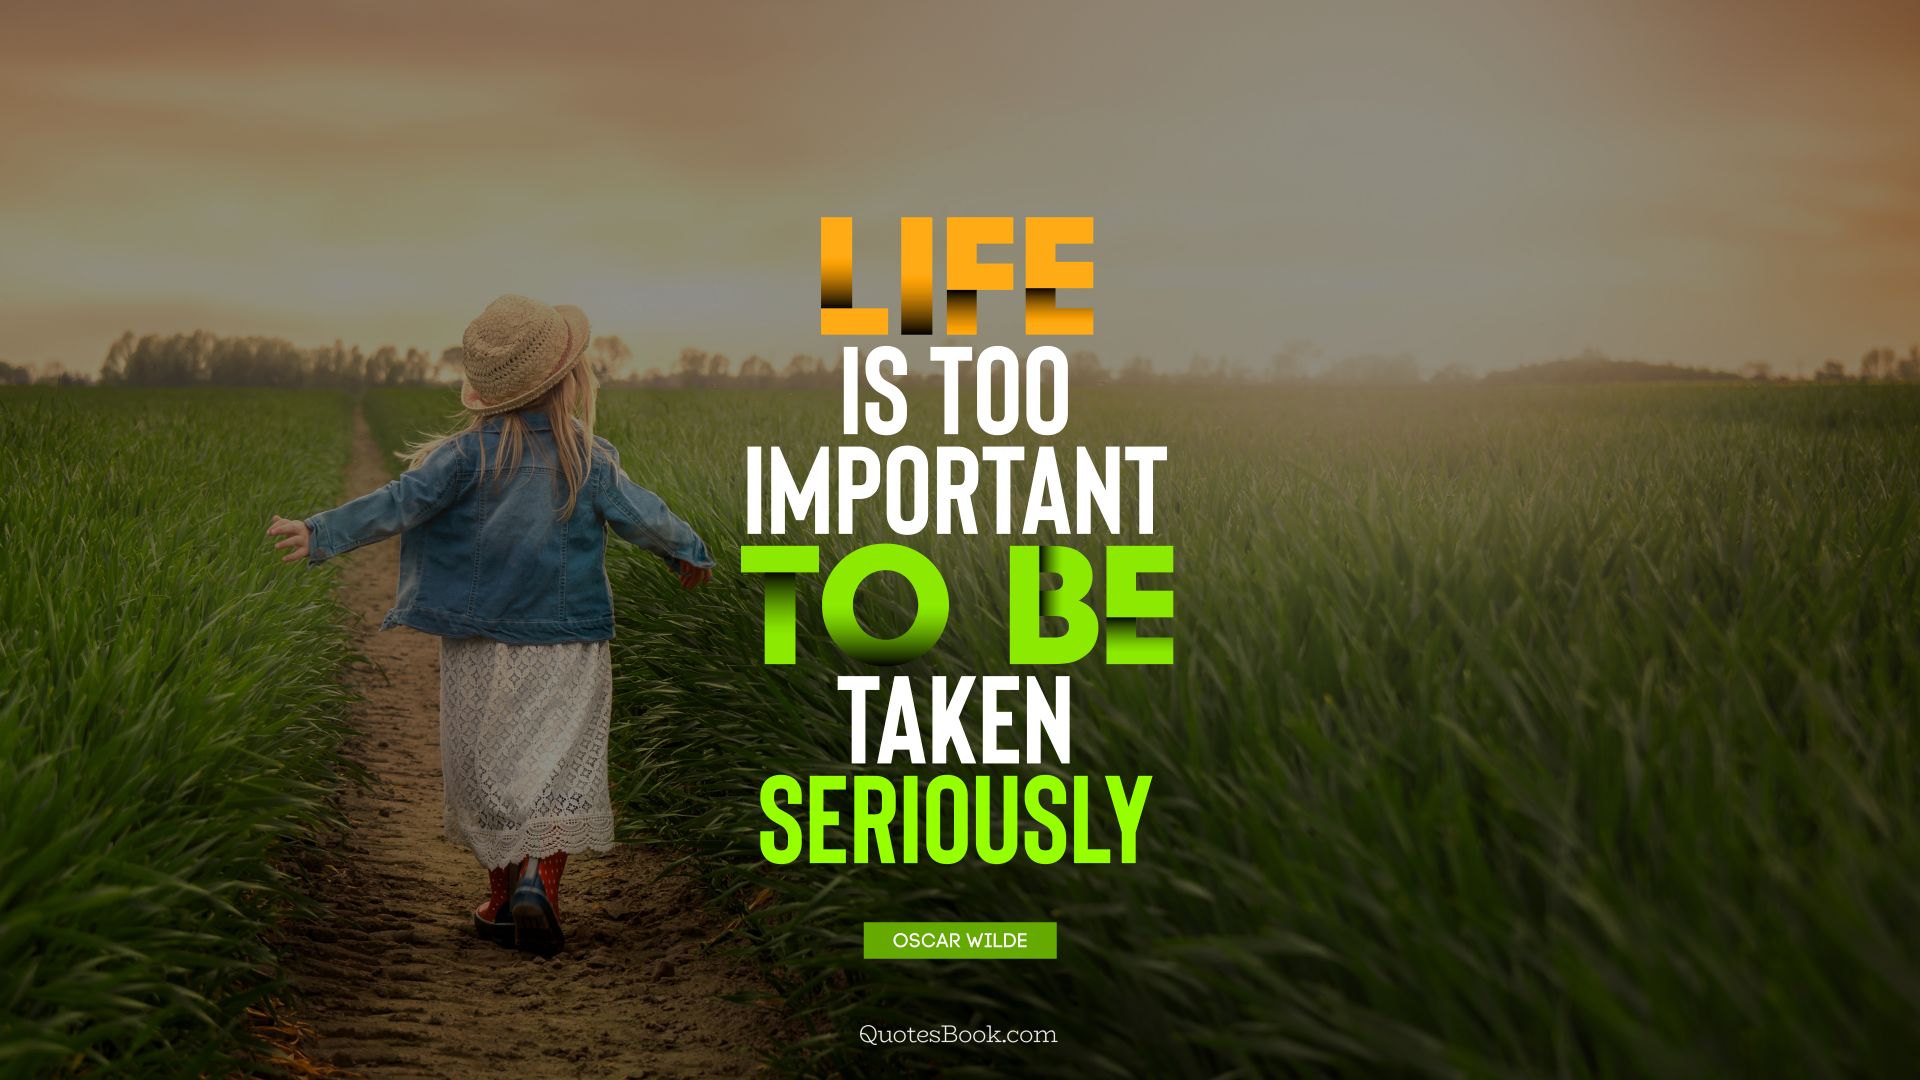 Life is too important to be taken seriously. - Quote by Oscar Wilde